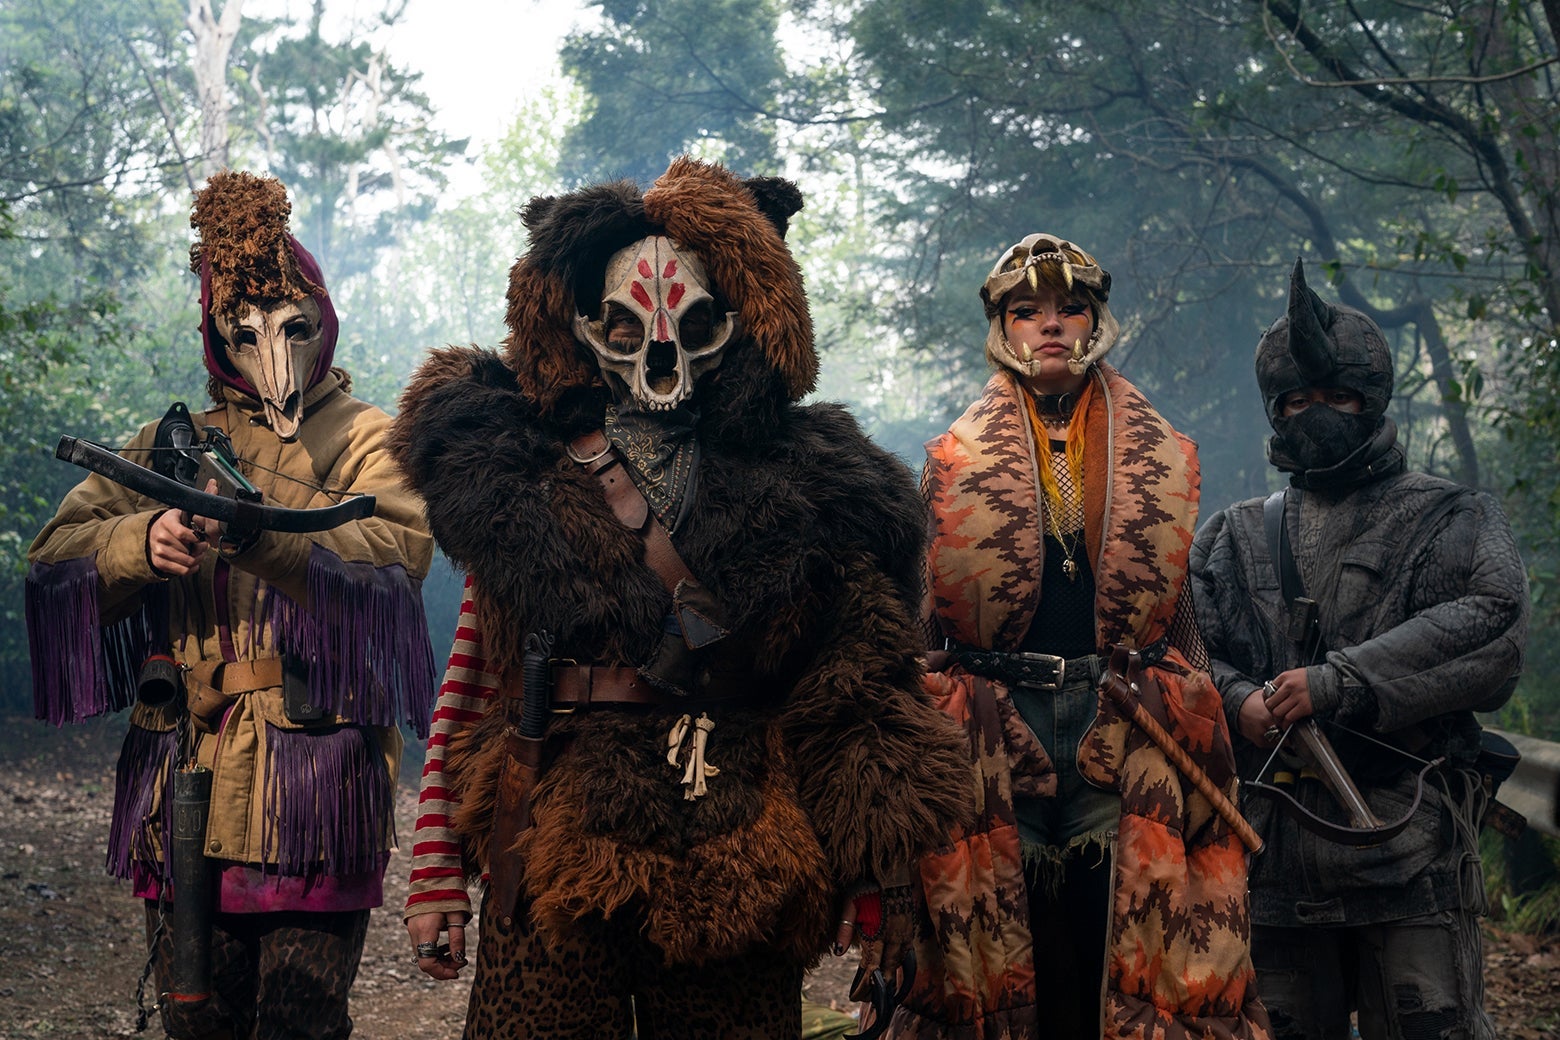 Four children, dressed in fur and wearing animal skulls over their faces, face the camera. The leftmost is aiming a crossbow at the camera.